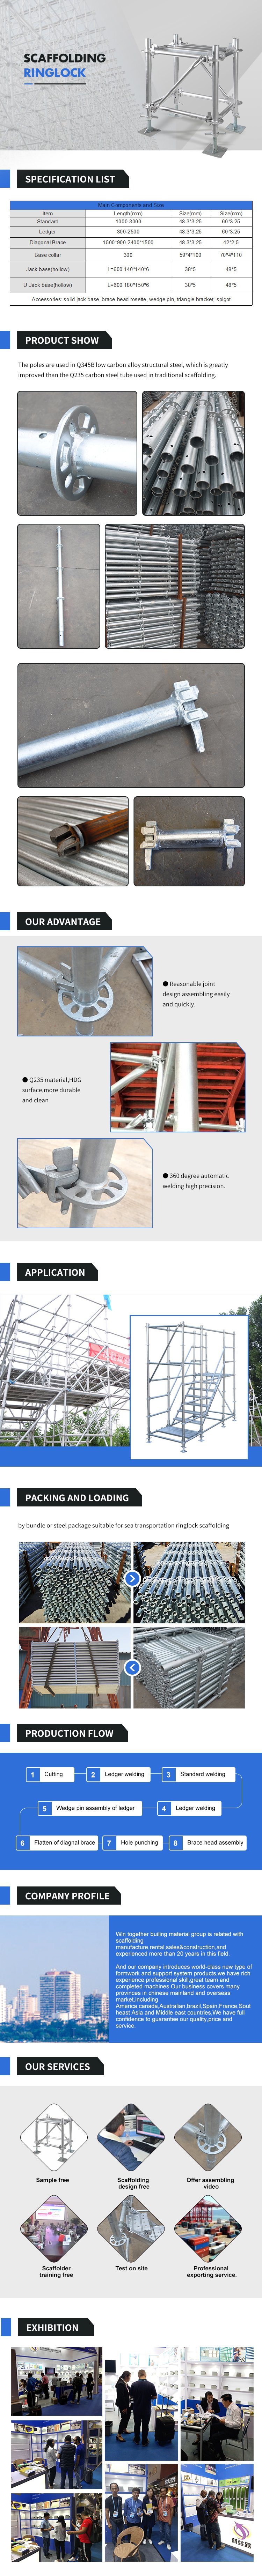 Low Prices High Quality 4-in Casters Steel Mini Cuplock Scaffold